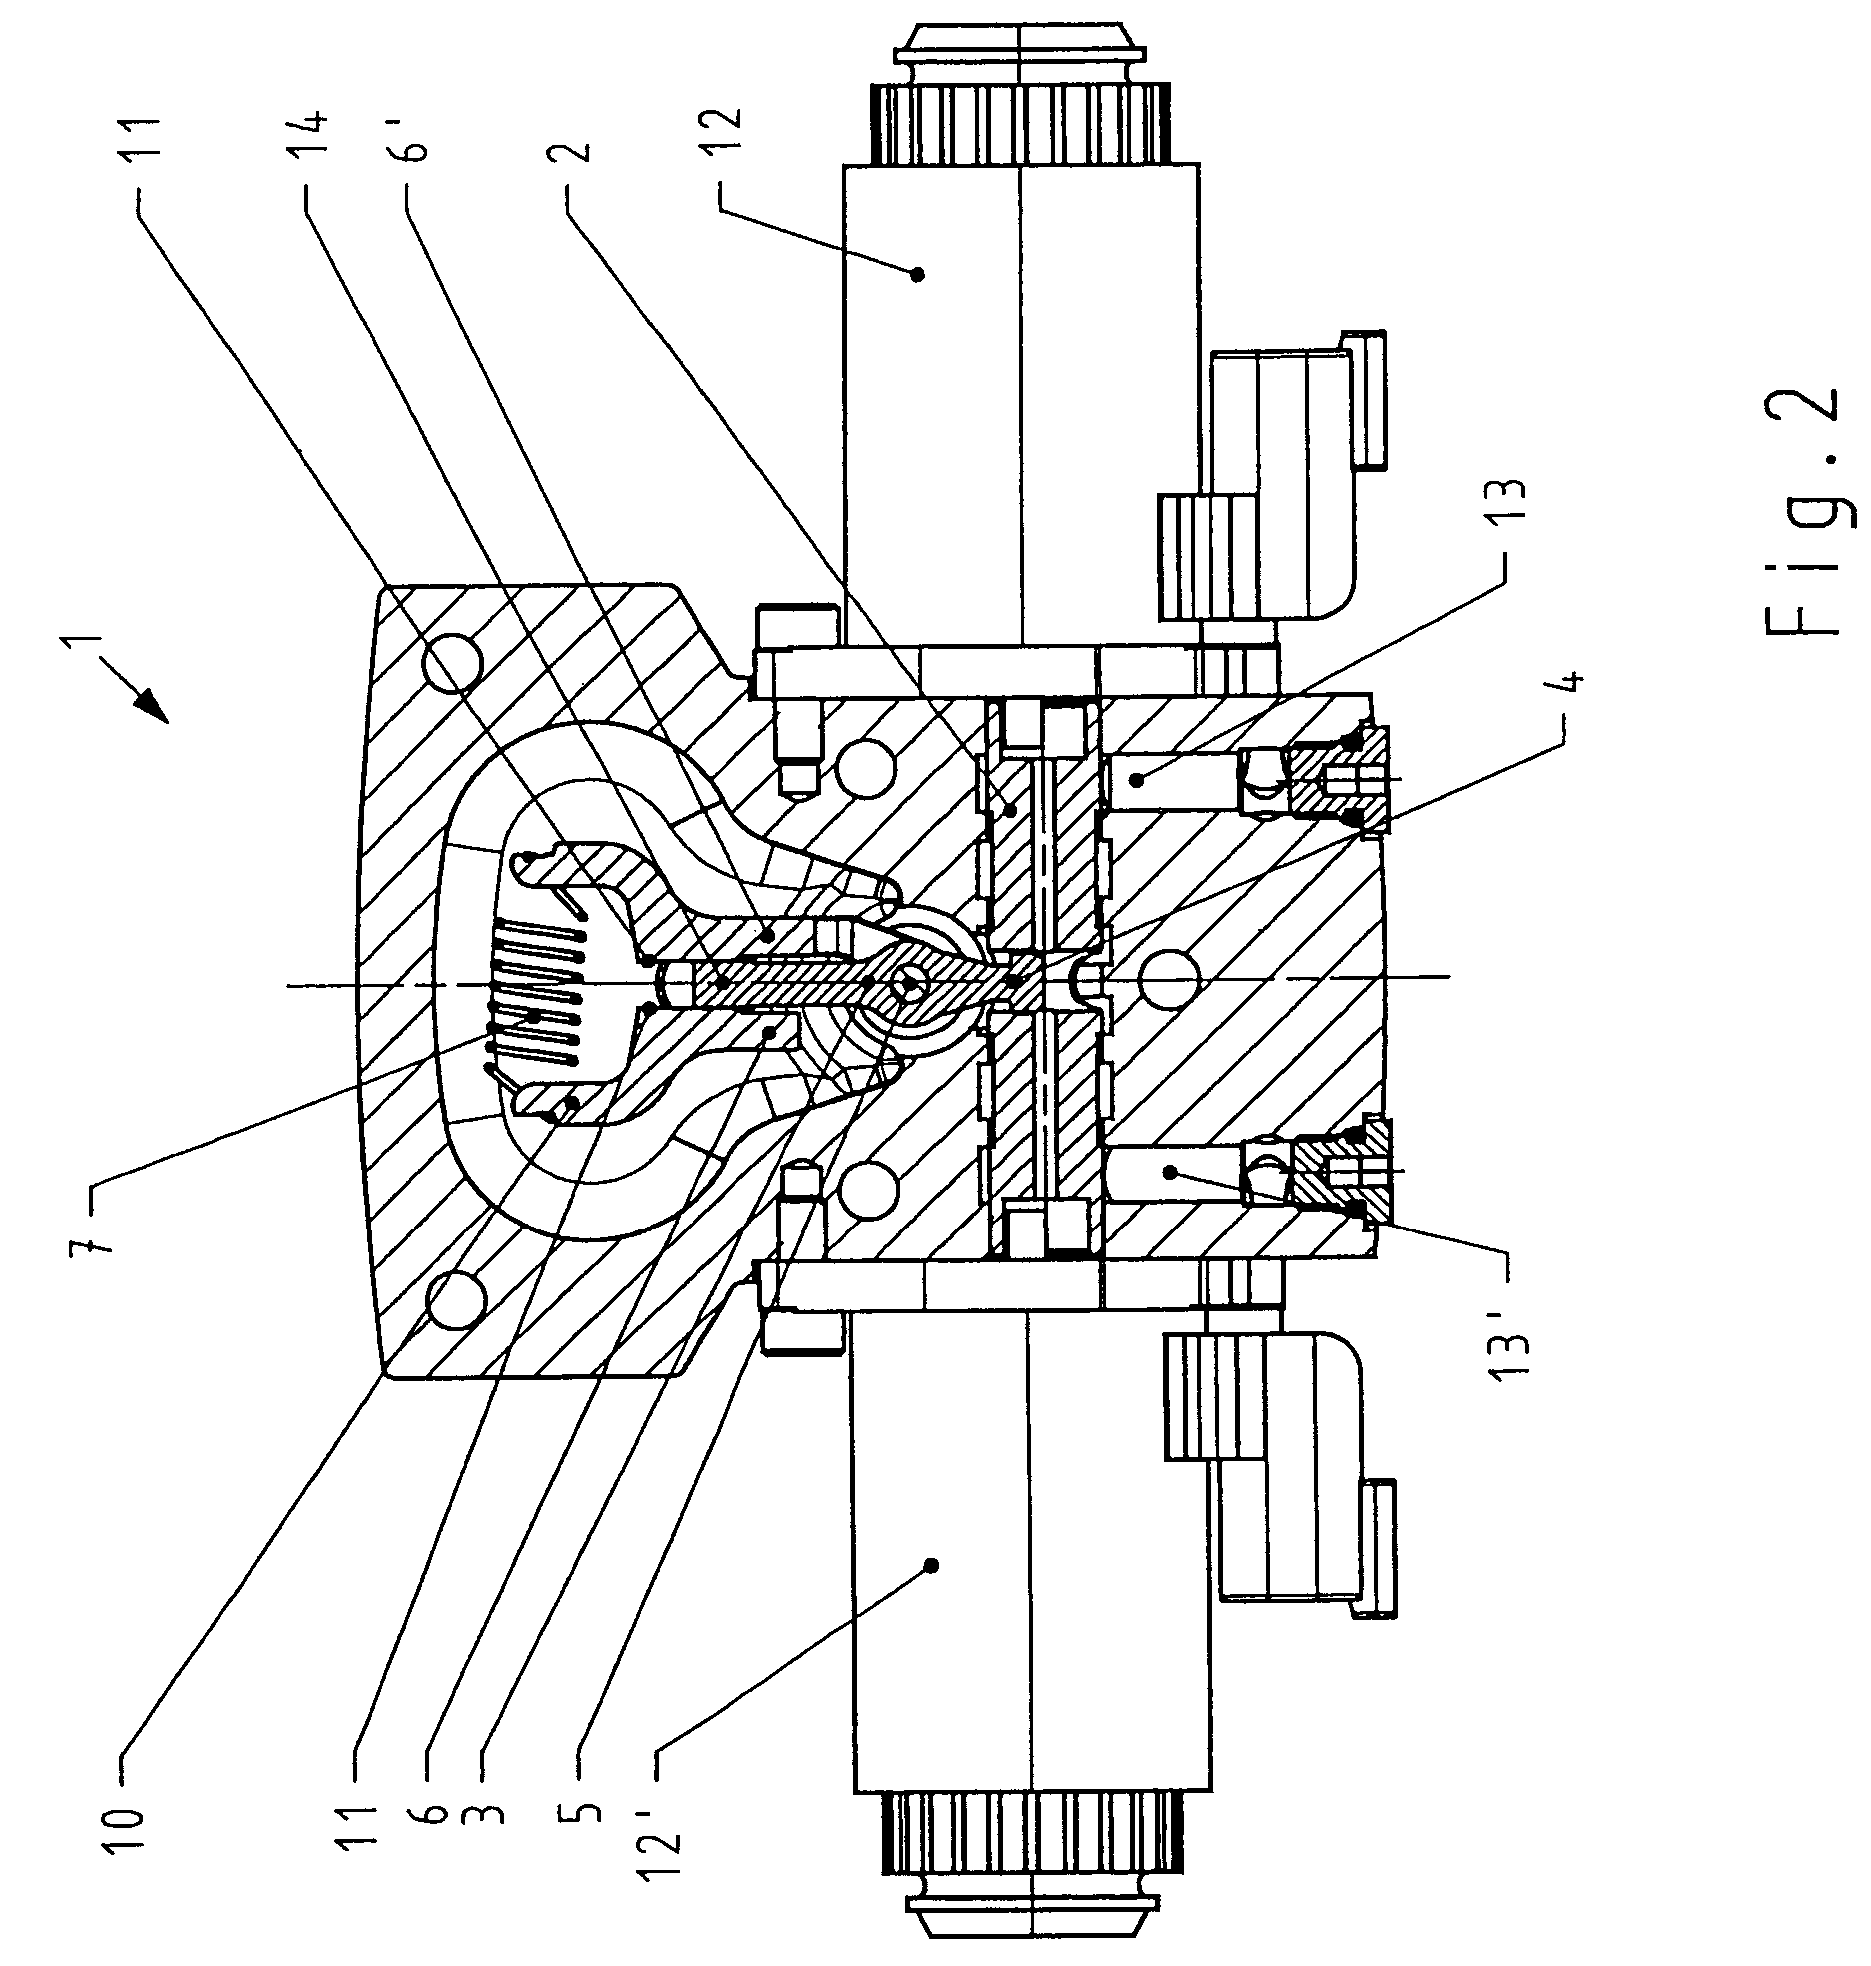 Axial piston machine having a device for the electrically proportional adjustment of its volumetric displacement